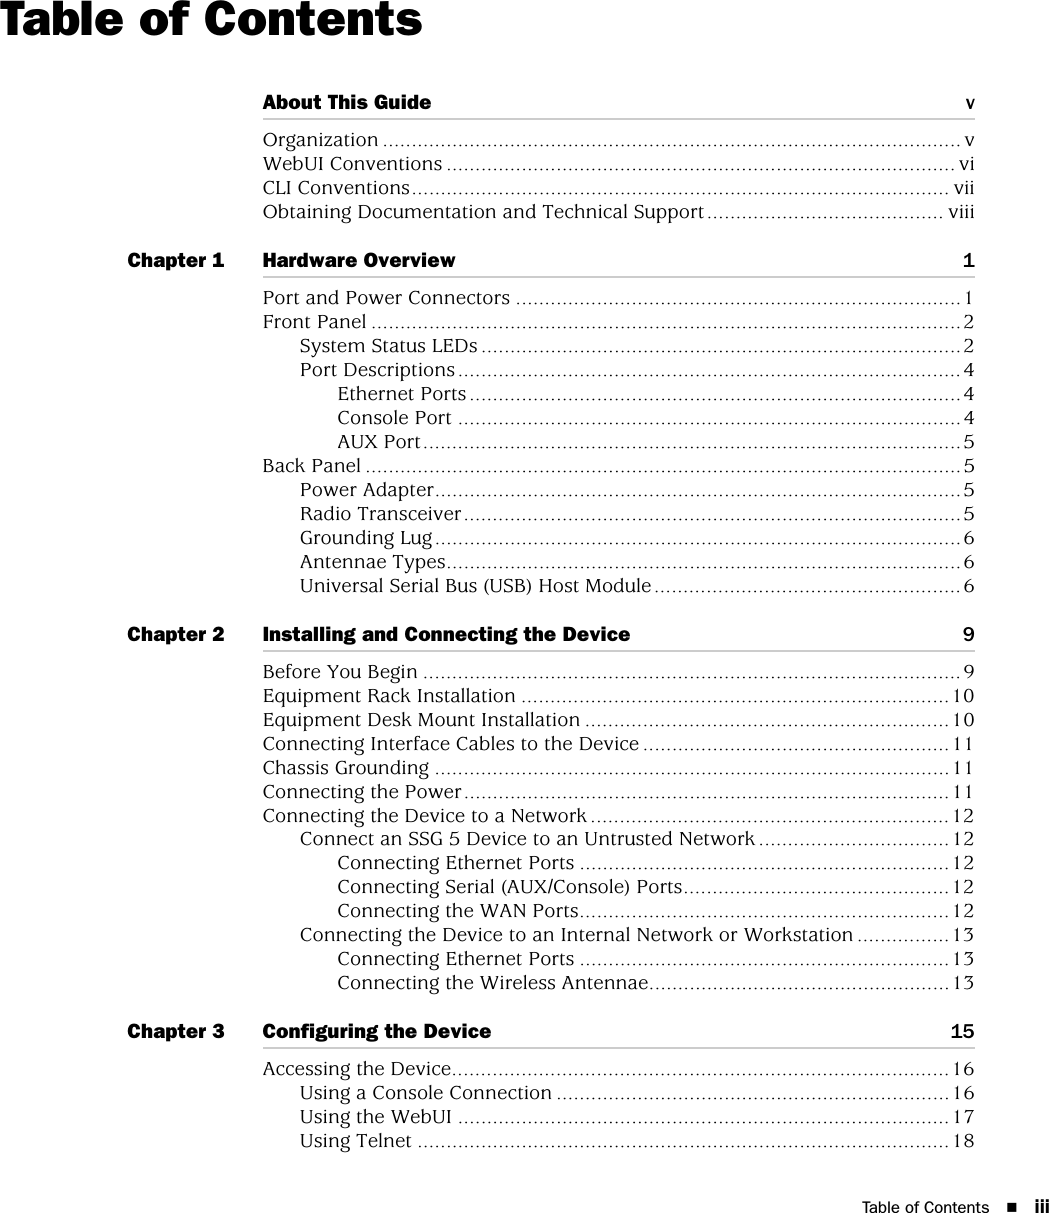 Table of Contents iiiTable of ContentsAbout This Guide vOrganization .................................................................................................... vWebUI Conventions ........................................................................................ viCLI Conventions............................................................................................. viiObtaining Documentation and Technical Support......................................... viiiChapter 1 Hardware Overview 1Port and Power Connectors .............................................................................1Front Panel ......................................................................................................2System Status LEDs ...................................................................................2Port Descriptions .......................................................................................4Ethernet Ports .....................................................................................4Console Port .......................................................................................4AUX Port.............................................................................................5Back Panel .......................................................................................................5Power Adapter...........................................................................................5Radio Transceiver......................................................................................5Grounding Lug...........................................................................................6Antennae Types.........................................................................................6Universal Serial Bus (USB) Host Module.....................................................6Chapter 2 Installing and Connecting the Device 9Before You Begin .............................................................................................9Equipment Rack Installation ..........................................................................10Equipment Desk Mount Installation ...............................................................10Connecting Interface Cables to the Device .....................................................11Chassis Grounding .........................................................................................11Connecting the Power....................................................................................11Connecting the Device to a Network ..............................................................12Connect an SSG 5 Device to an Untrusted Network .................................12Connecting Ethernet Ports ................................................................12Connecting Serial (AUX/Console) Ports..............................................12Connecting the WAN Ports................................................................12Connecting the Device to an Internal Network or Workstation ................13Connecting Ethernet Ports ................................................................13Connecting the Wireless Antennae....................................................13Chapter 3 Configuring the Device 15Accessing the Device......................................................................................16Using a Console Connection ....................................................................16Using the WebUI .....................................................................................17Using Telnet ............................................................................................18